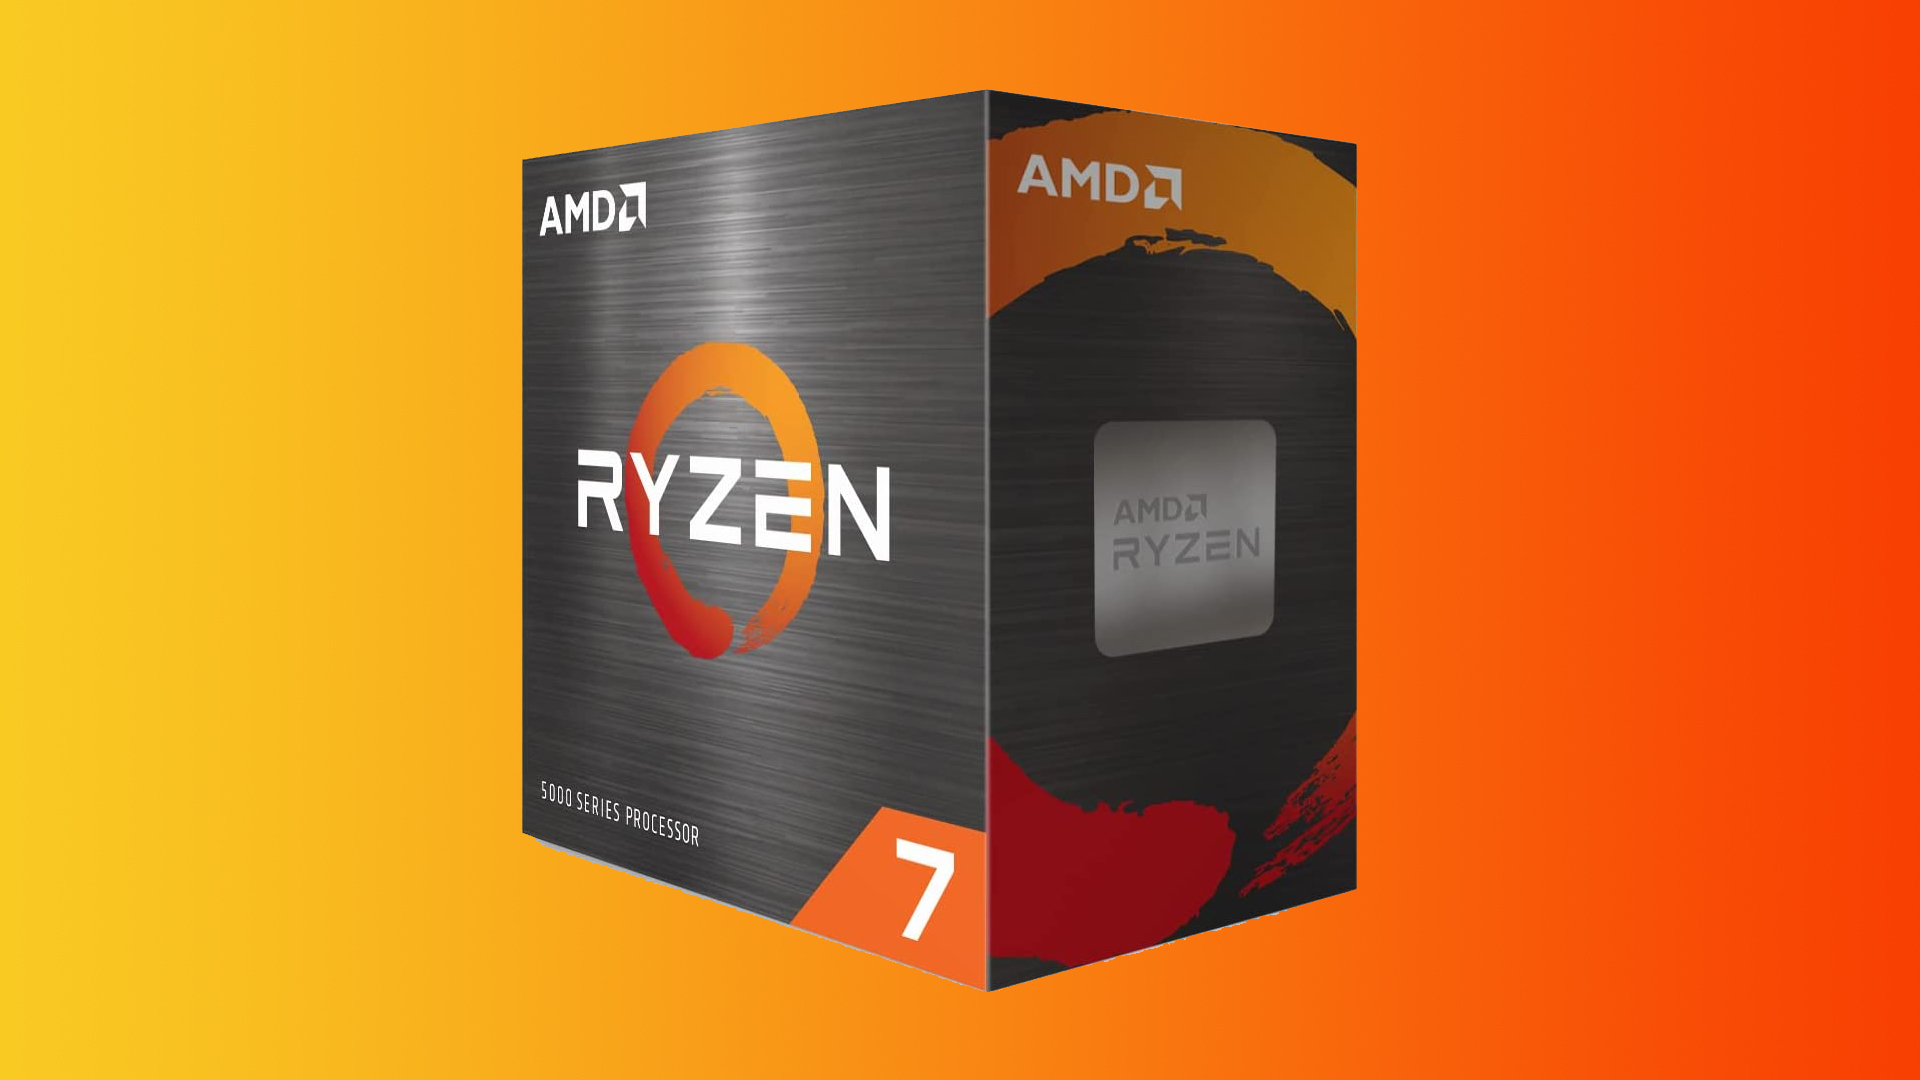 Grab the powerful AMD Ryzen 7 5700X from Amazon for just £168 |  Eurogamer.net